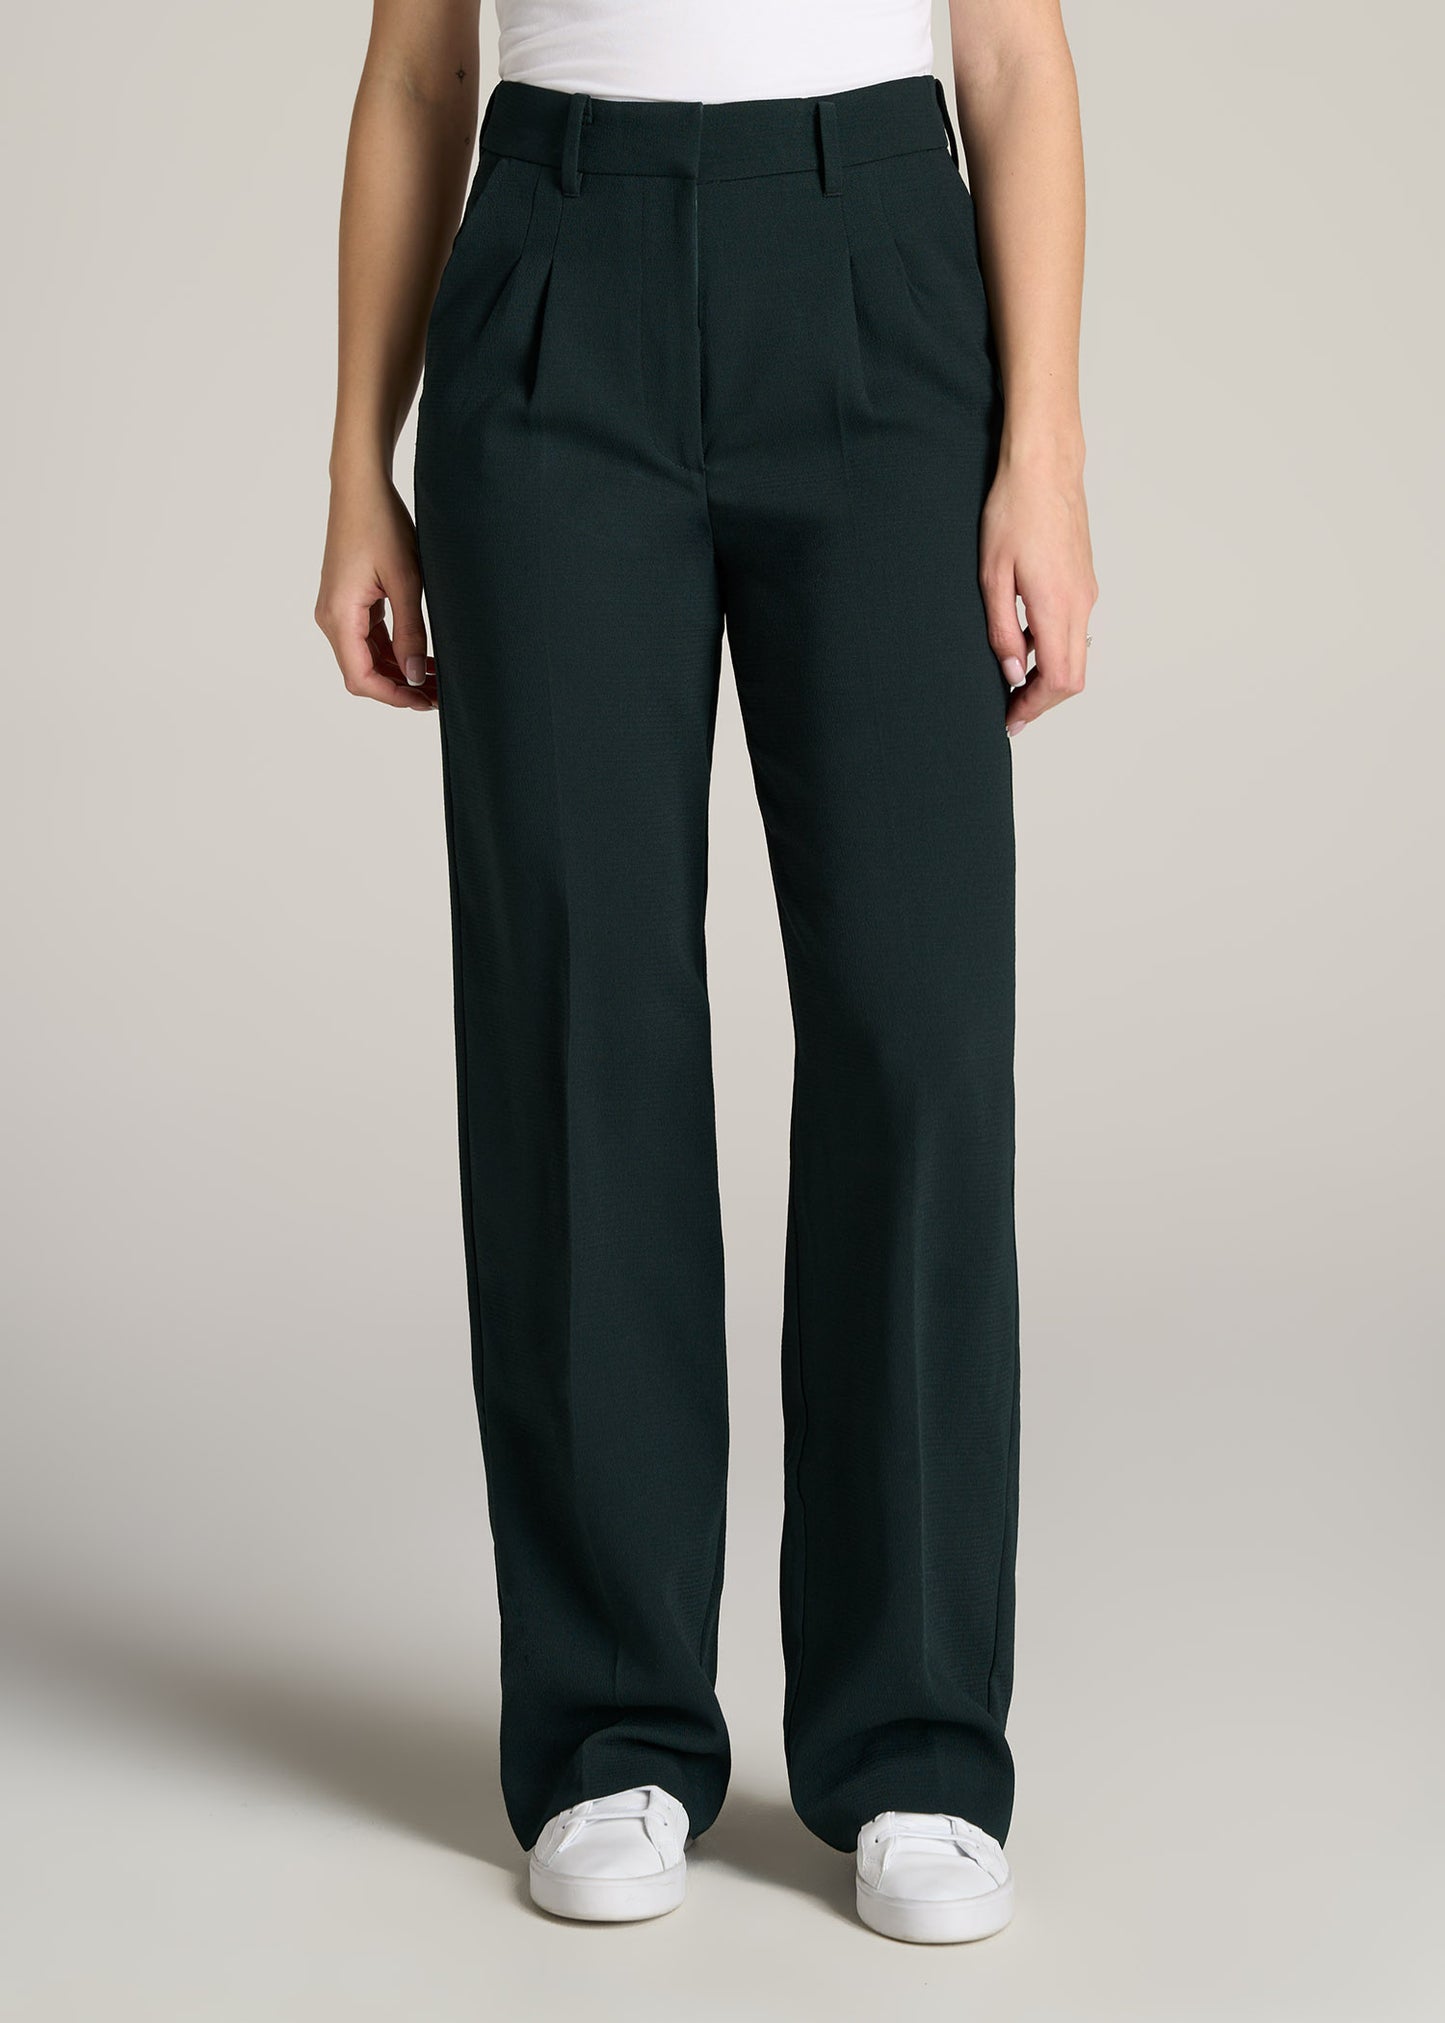 Evergreen Modal Flared Pant (Website - Exclusive)